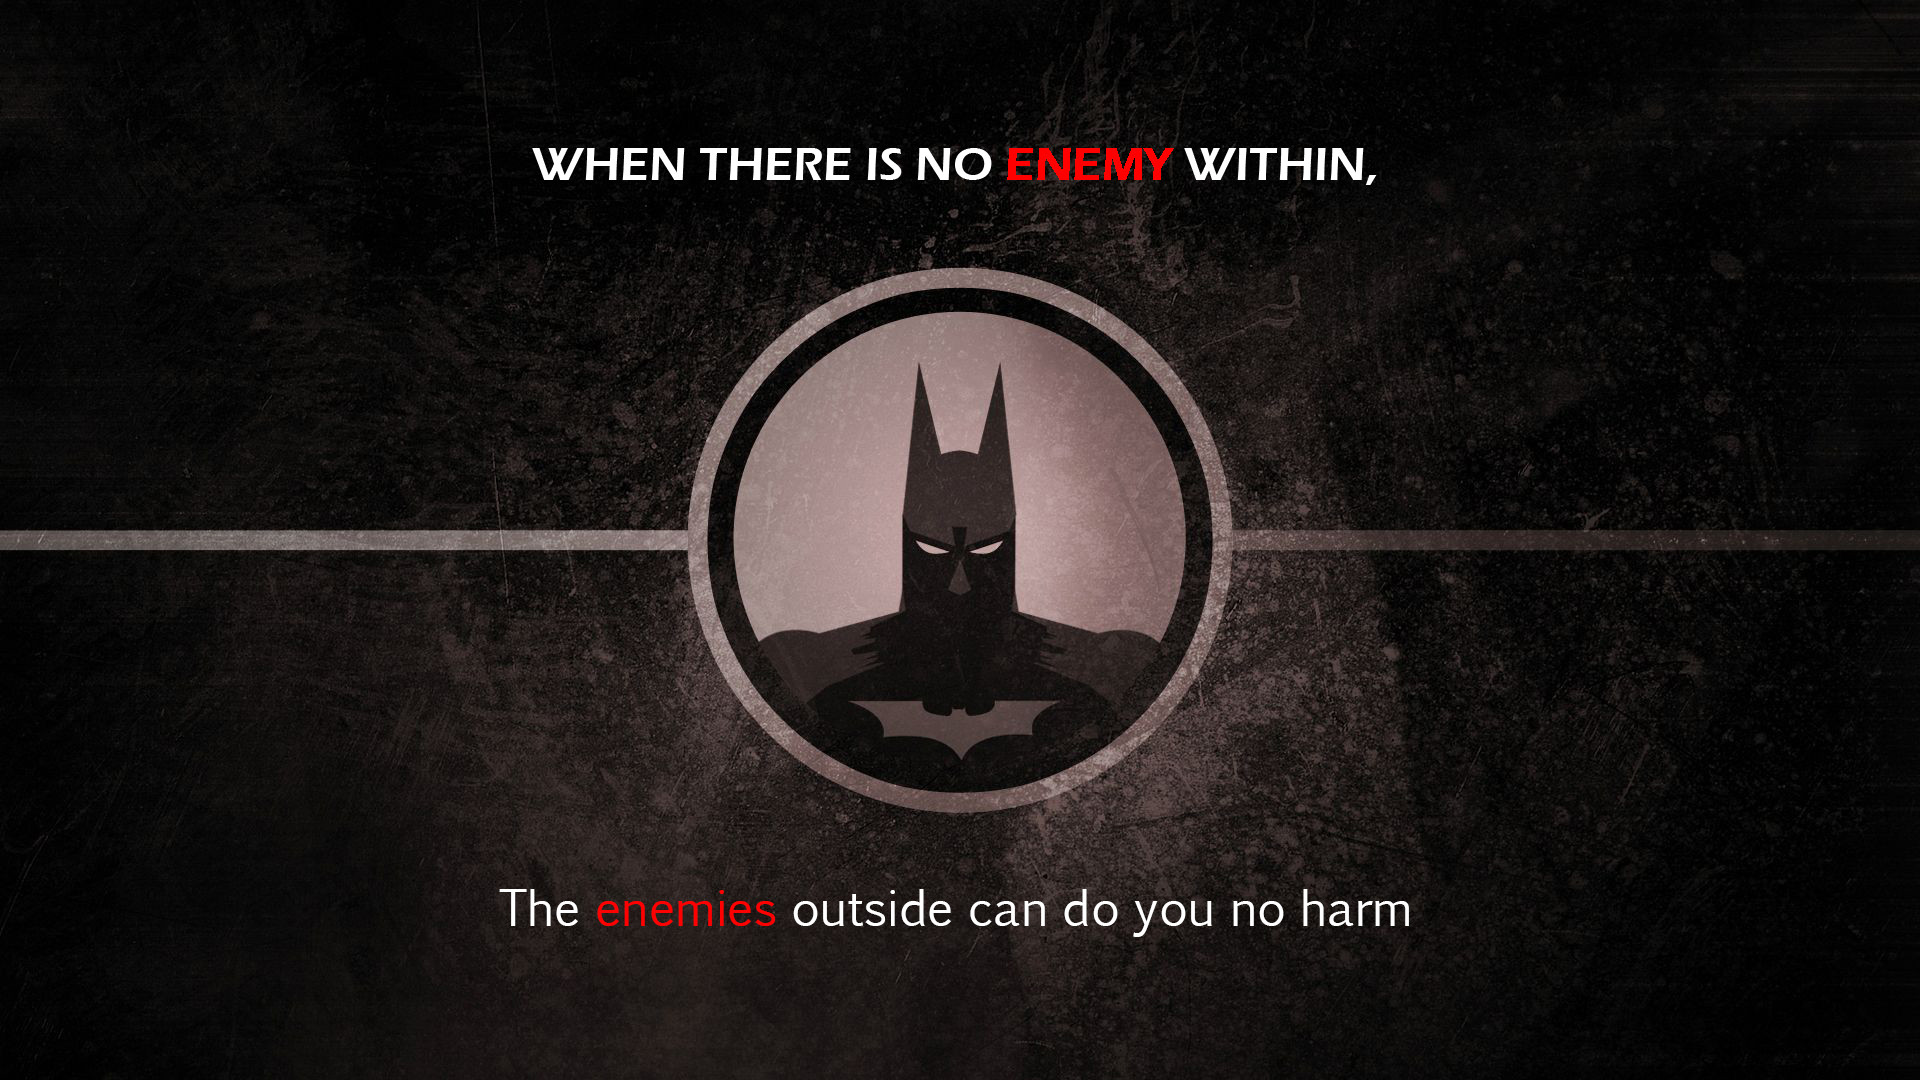 Batman Quote 1 Full HD Wallpaper and Background Image | 1920x1080 | ID:506445